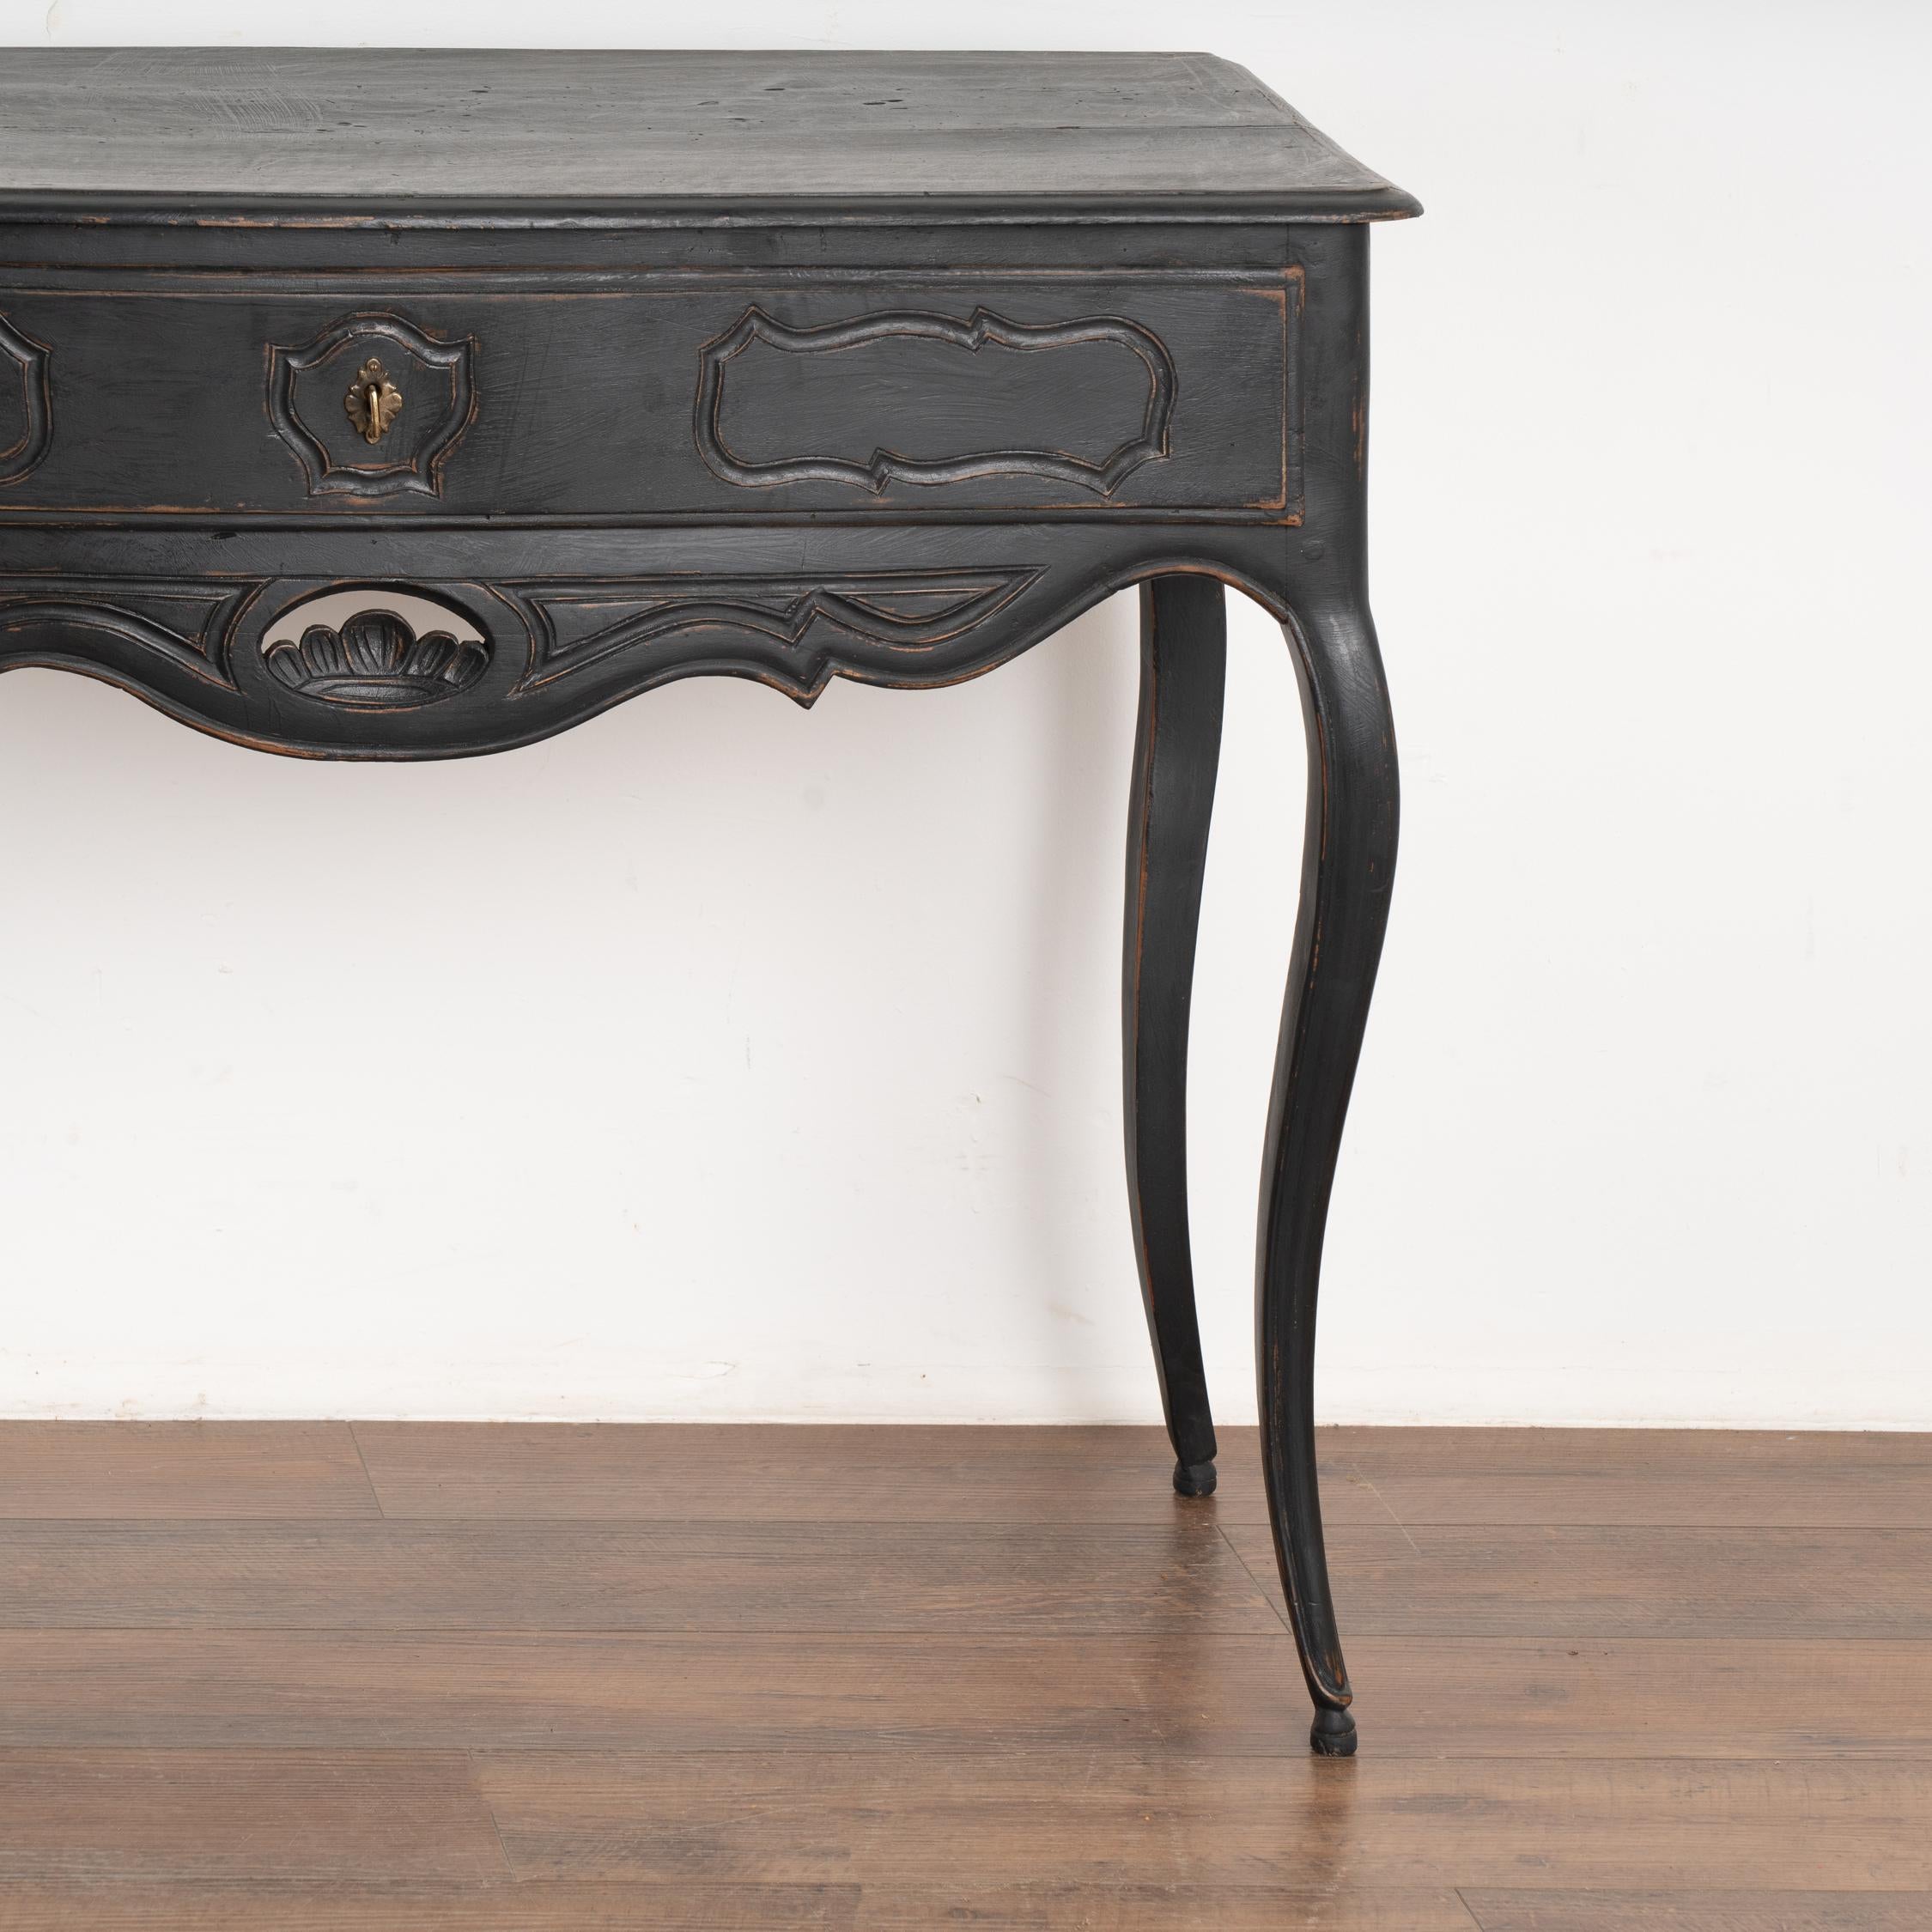 Oak Pair, Black Carved Side Tables With Cabriolet Legs, France circa 1850-70